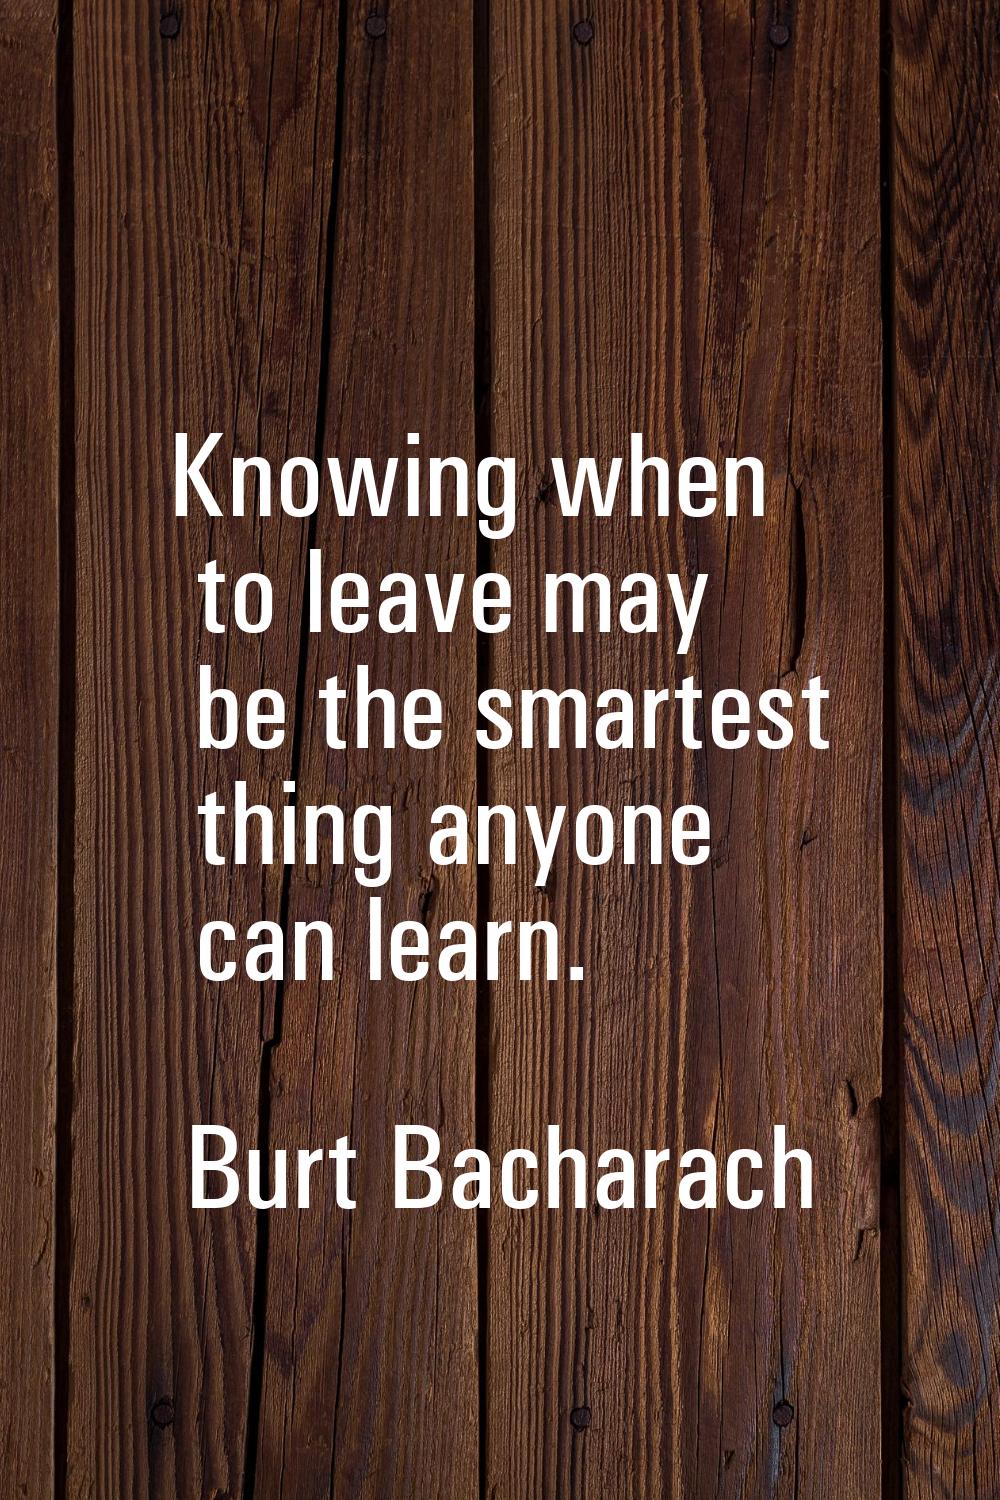 Knowing when to leave may be the smartest thing anyone can learn.